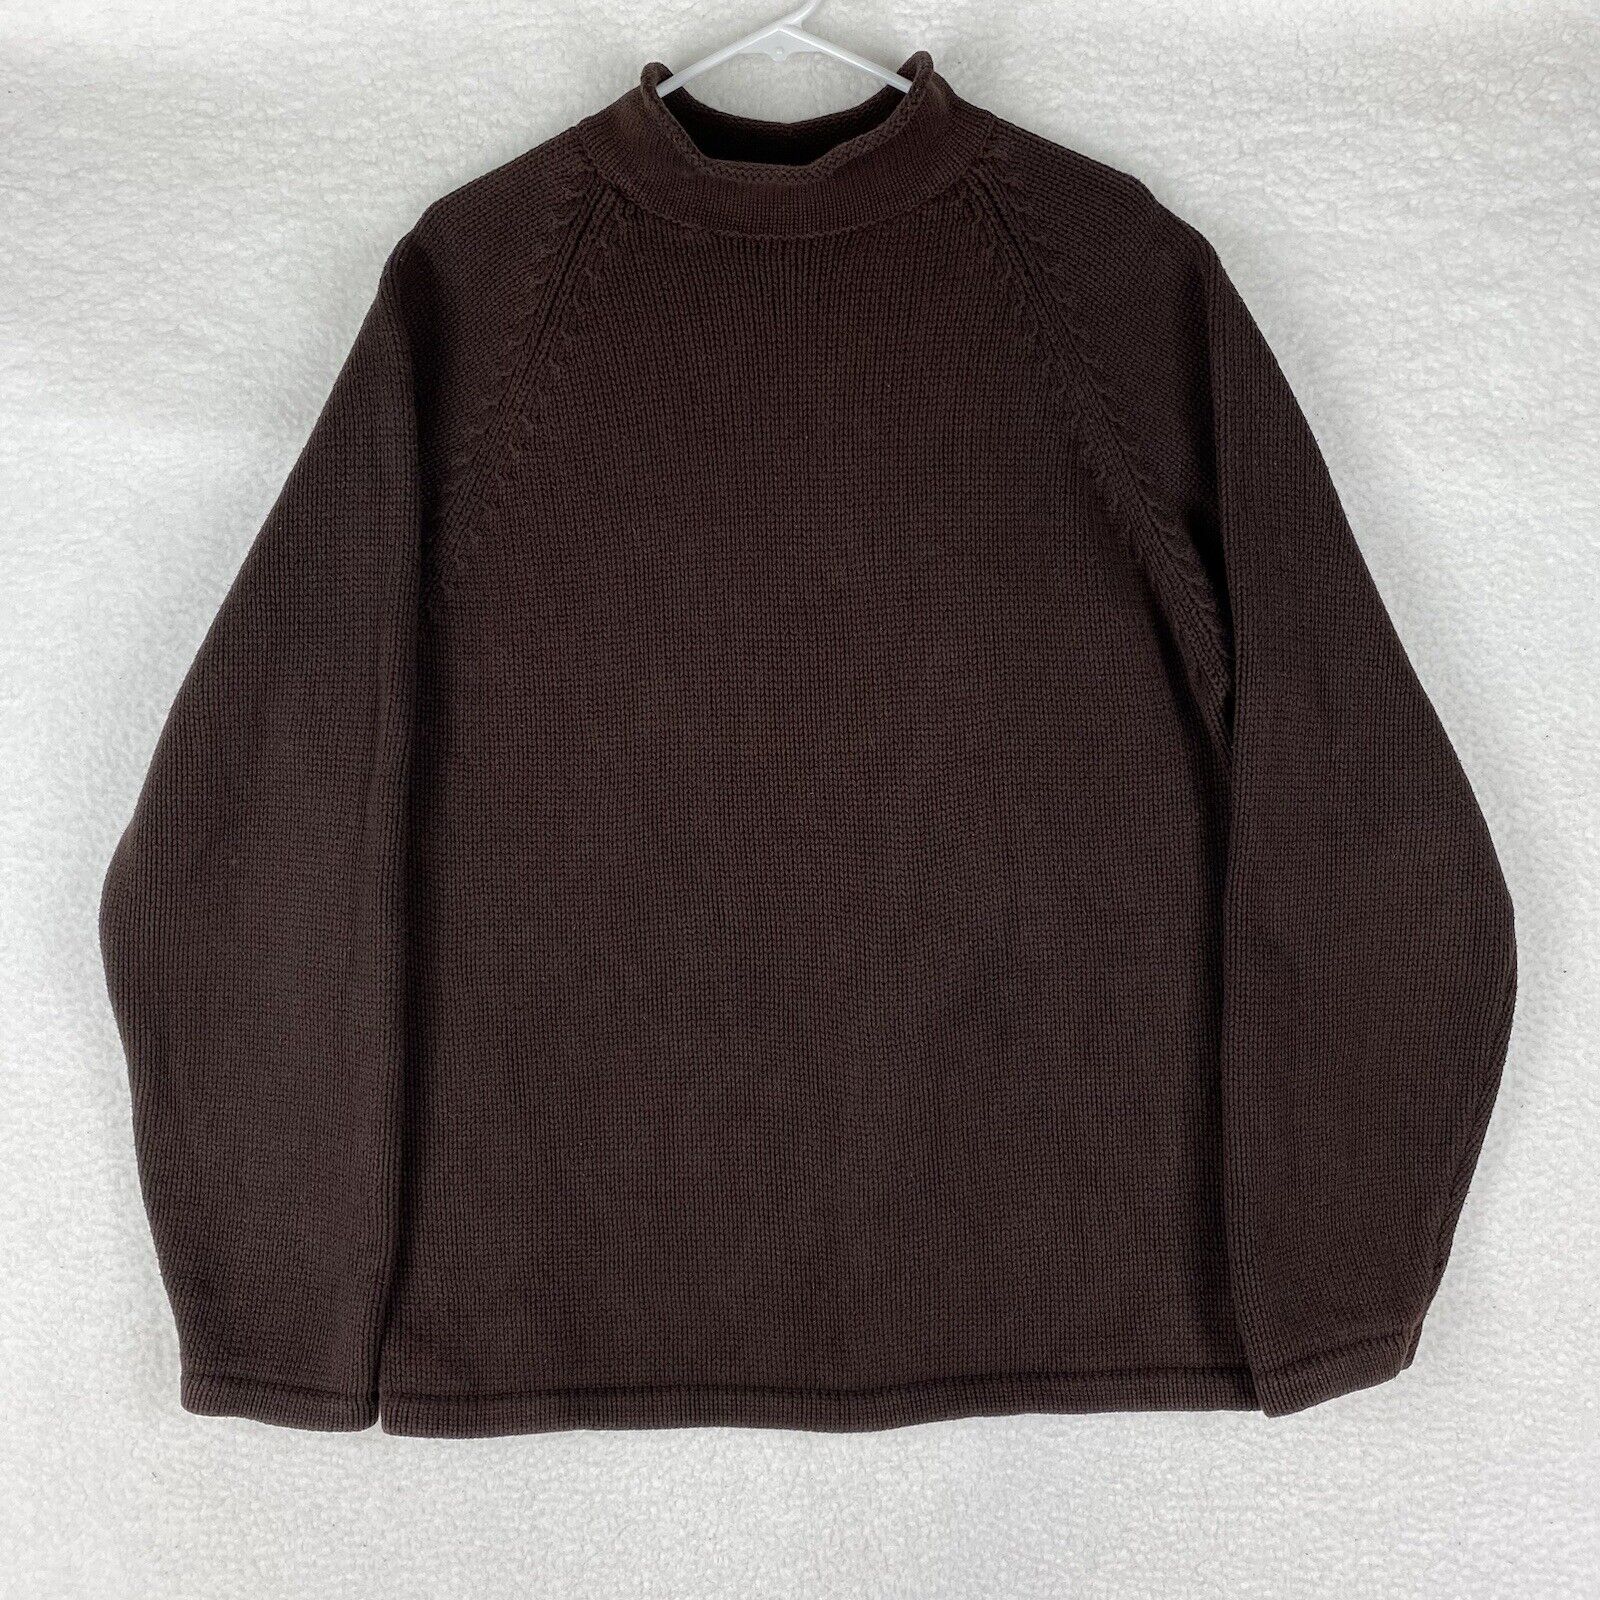 Vintage J Crew Sweater Mens Large Roll Neck Cotton Heavy Knit Pullover Y2K Brown